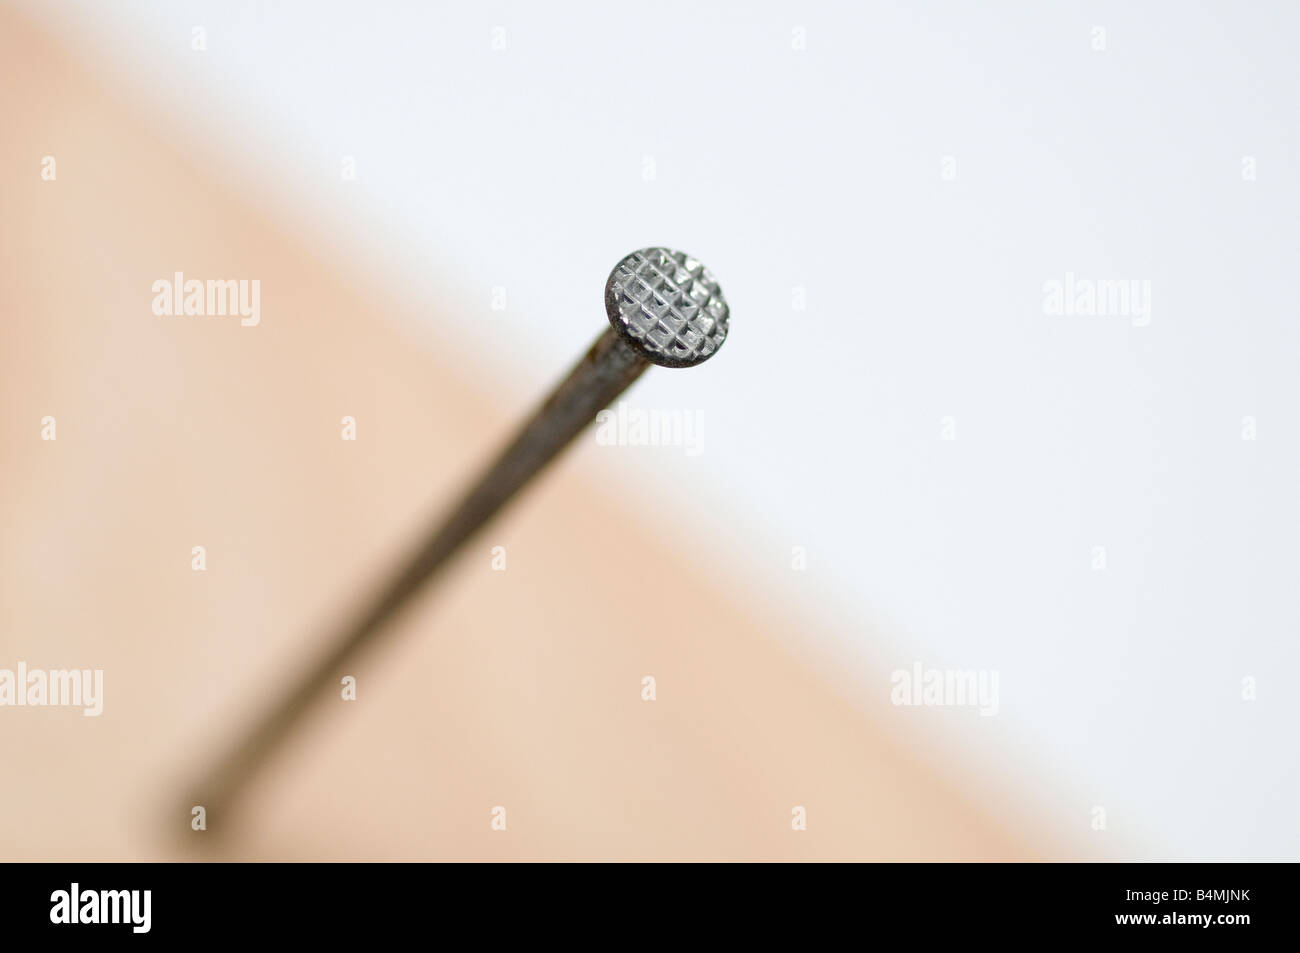 detail of a nail driven in Stock Photo